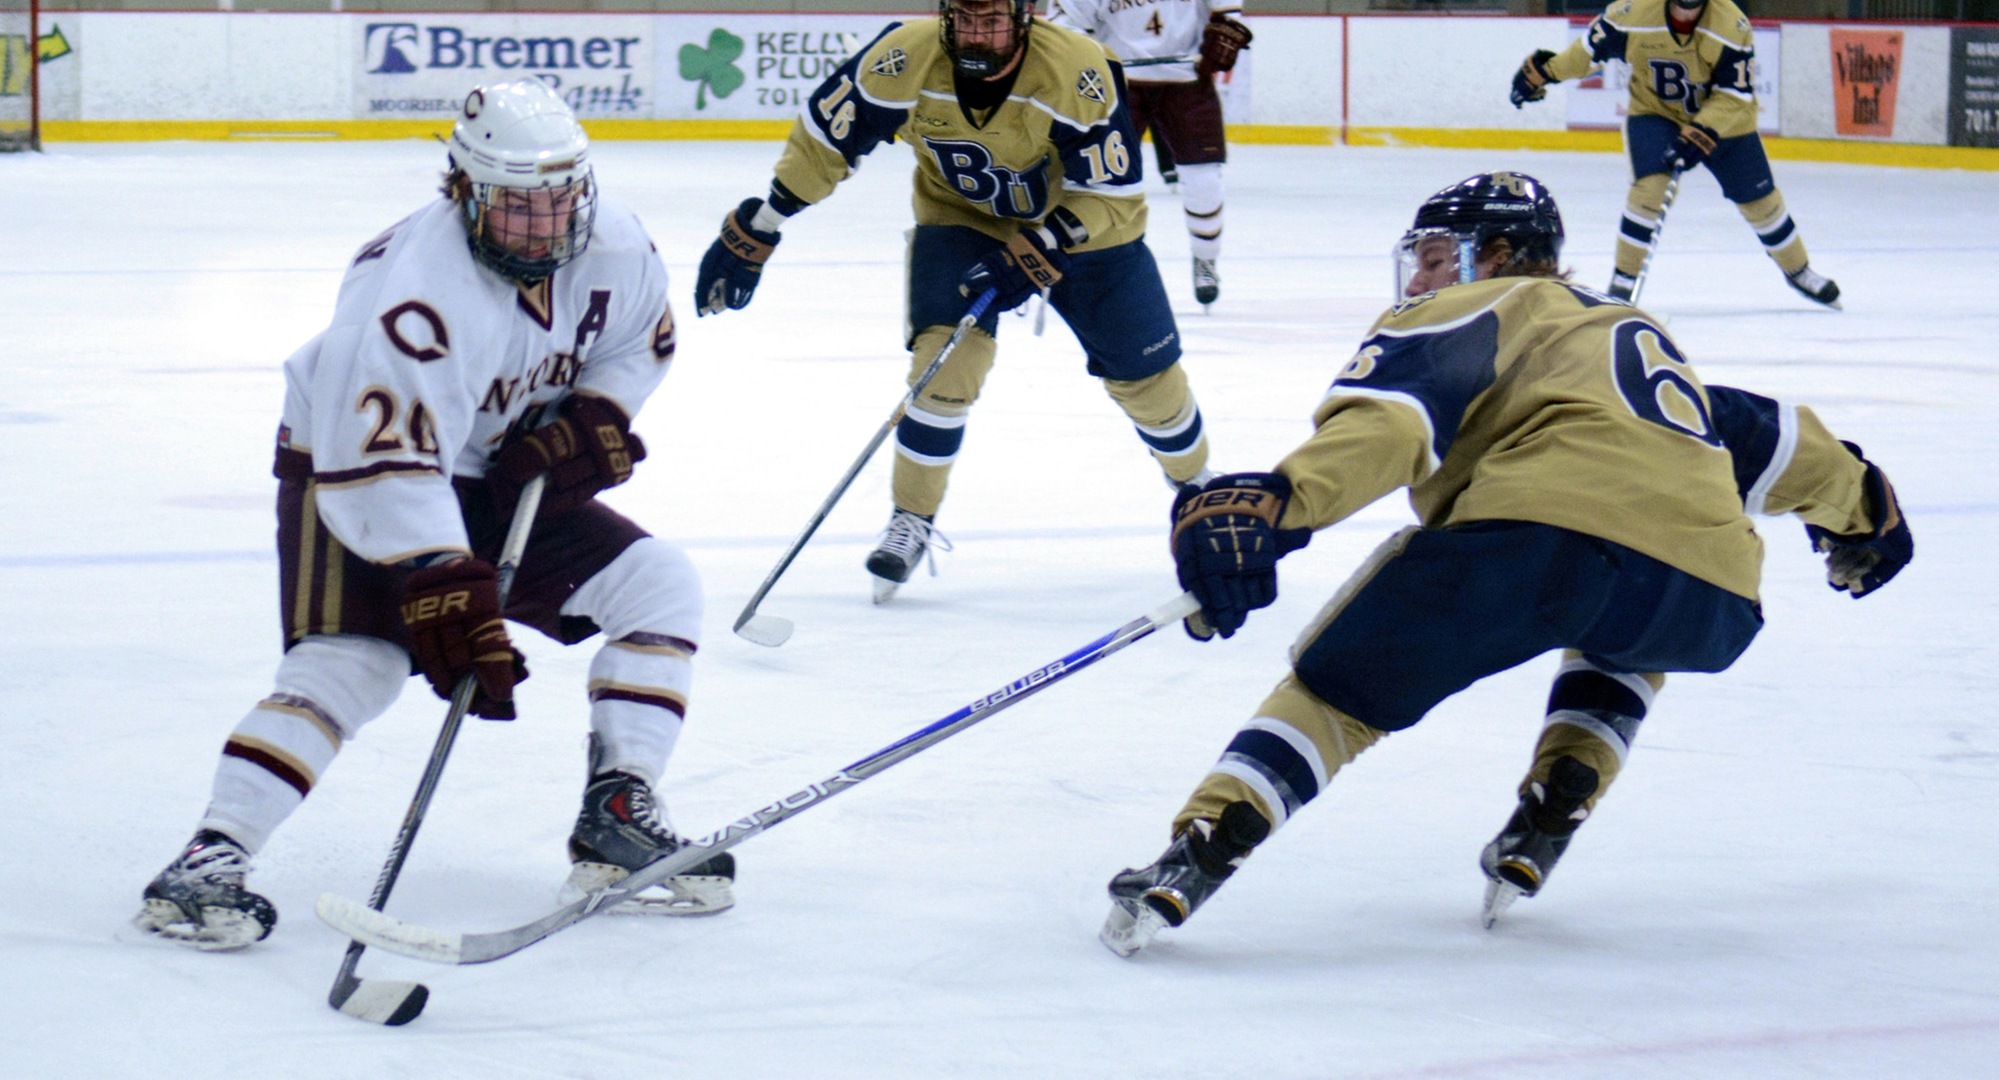 Senior Jeremy Johnson scored the game-winning goal in the Cobbers' playoff-clinching 6-2 victory at Bethel.